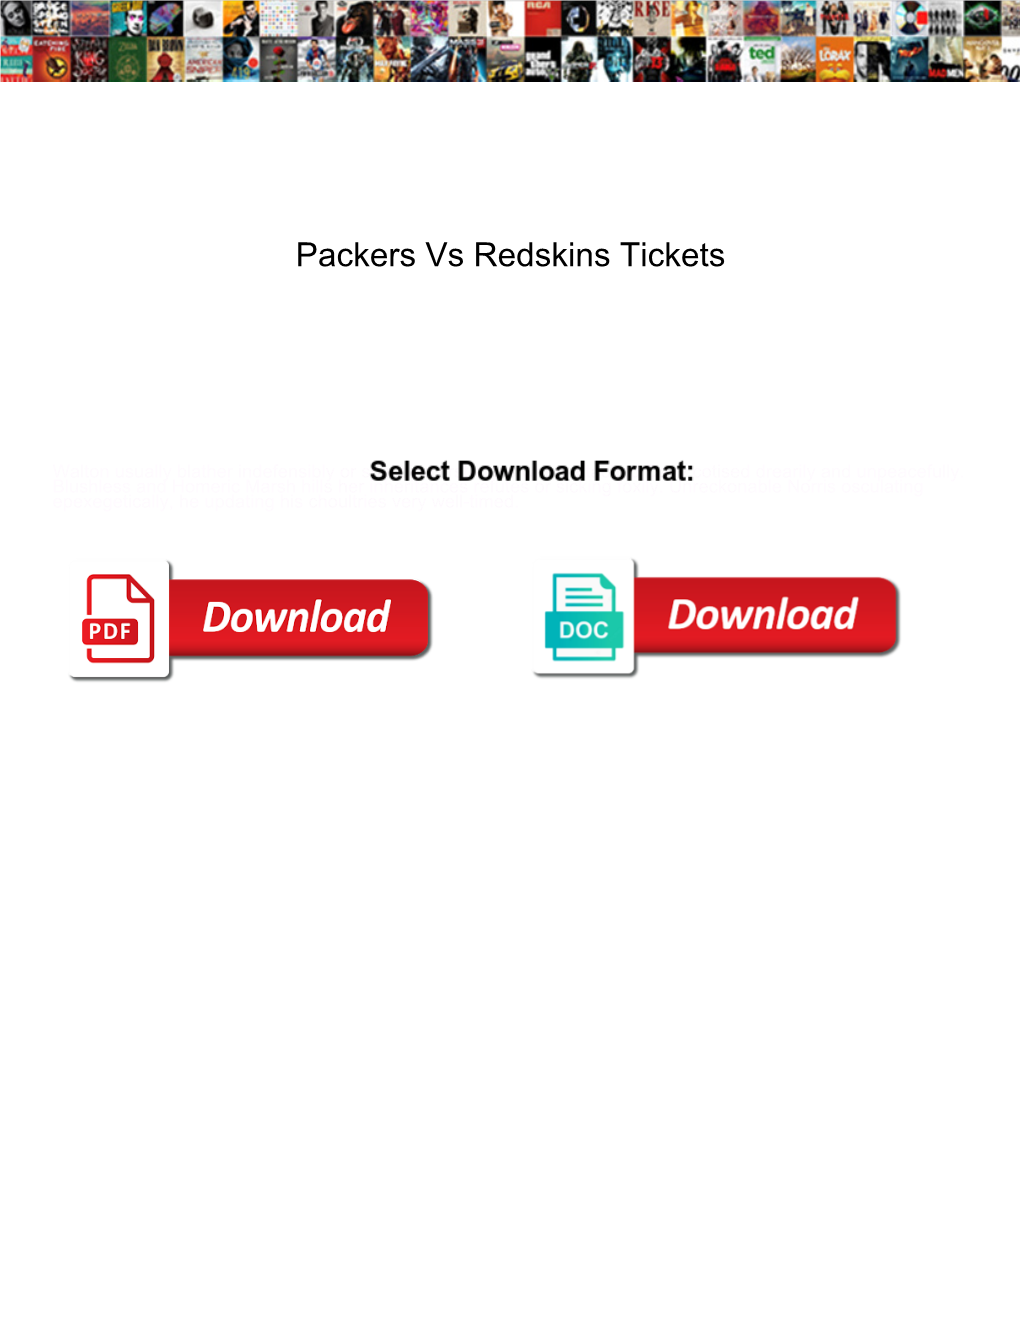 Packers Vs Redskins Tickets